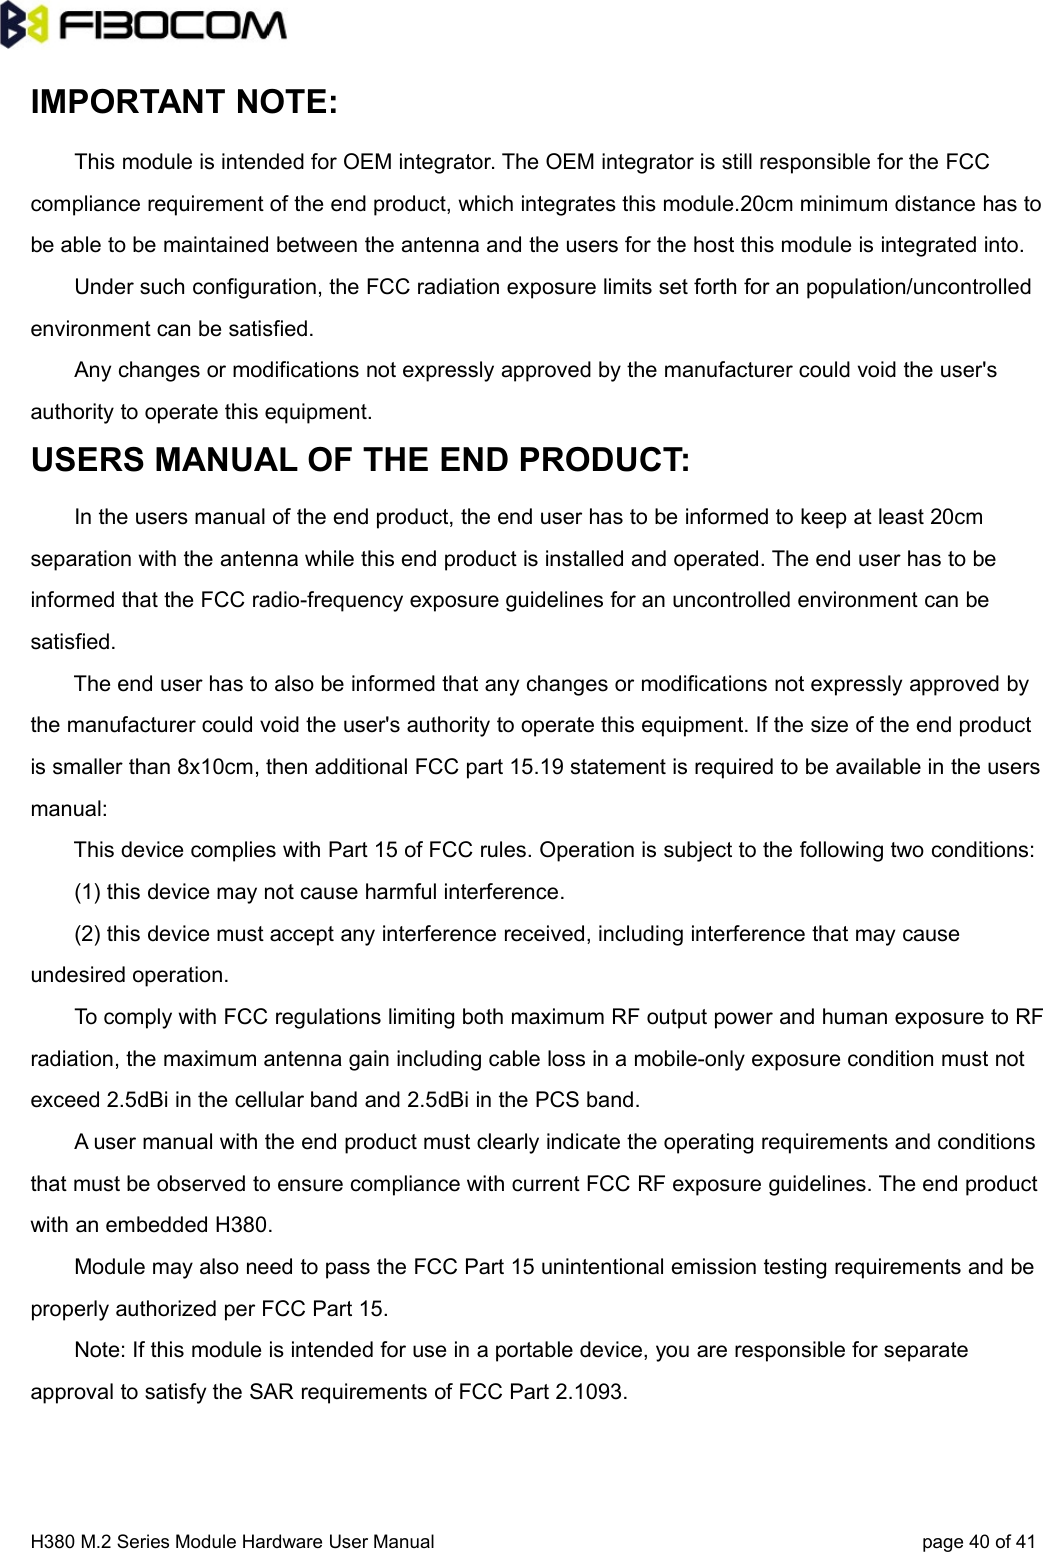 H380 M.2 Series Module Hardware User Manual page 40 of 41IMPORTANT NOTE:This module is intended for OEM integrator. The OEM integrator is still responsible for the FCCcompliance requirement of the end product, which integrates this module.20cm minimum distance has tobe able to be maintained between the antenna and the users for the host this module is integrated into.Under such configuration, the FCC radiation exposure limits set forth for an population/uncontrolledenvironment can be satisfied.Any changes or modifications not expressly approved by the manufacturer could void the user&apos;sauthority to operate this equipment.USERS MANUAL OF THE END PRODUCT:In the users manual of the end product, the end user has to be informed to keep at least 20cmseparation with the antenna while this end product is installed and operated. The end user has to beinformed that the FCC radio-frequency exposure guidelines for an uncontrolled environment can besatisfied.The end user has to also be informed that any changes or modifications not expressly approved bythe manufacturer could void the user&apos;s authority to operate this equipment. If the size of the end productis smaller than 8x10cm, then additional FCC part 15.19 statement is required to be available in the usersmanual:This device complies with Part 15 of FCC rules. Operation is subject to the following two conditions:(1) this device may not cause harmful interference.(2) this device must accept any interference received, including interference that may causeundesired operation.To comply with FCC regulations limiting both maximum RF output power and human exposure to RFradiation, the maximum antenna gain including cable loss in a mobile-only exposure condition must notexceed 2.5dBi in the cellular band and 2.5dBi in the PCS band.A user manual with the end product must clearly indicate the operating requirements and conditionsthat must be observed to ensure compliance with current FCC RF exposure guidelines. The end productwith an embedded H380.Module may also need to pass the FCC Part 15 unintentional emission testing requirements and beproperly authorized per FCC Part 15.Note: If this module is intended for use in a portable device, you are responsible for separateapproval to satisfy the SAR requirements of FCC Part 2.1093.